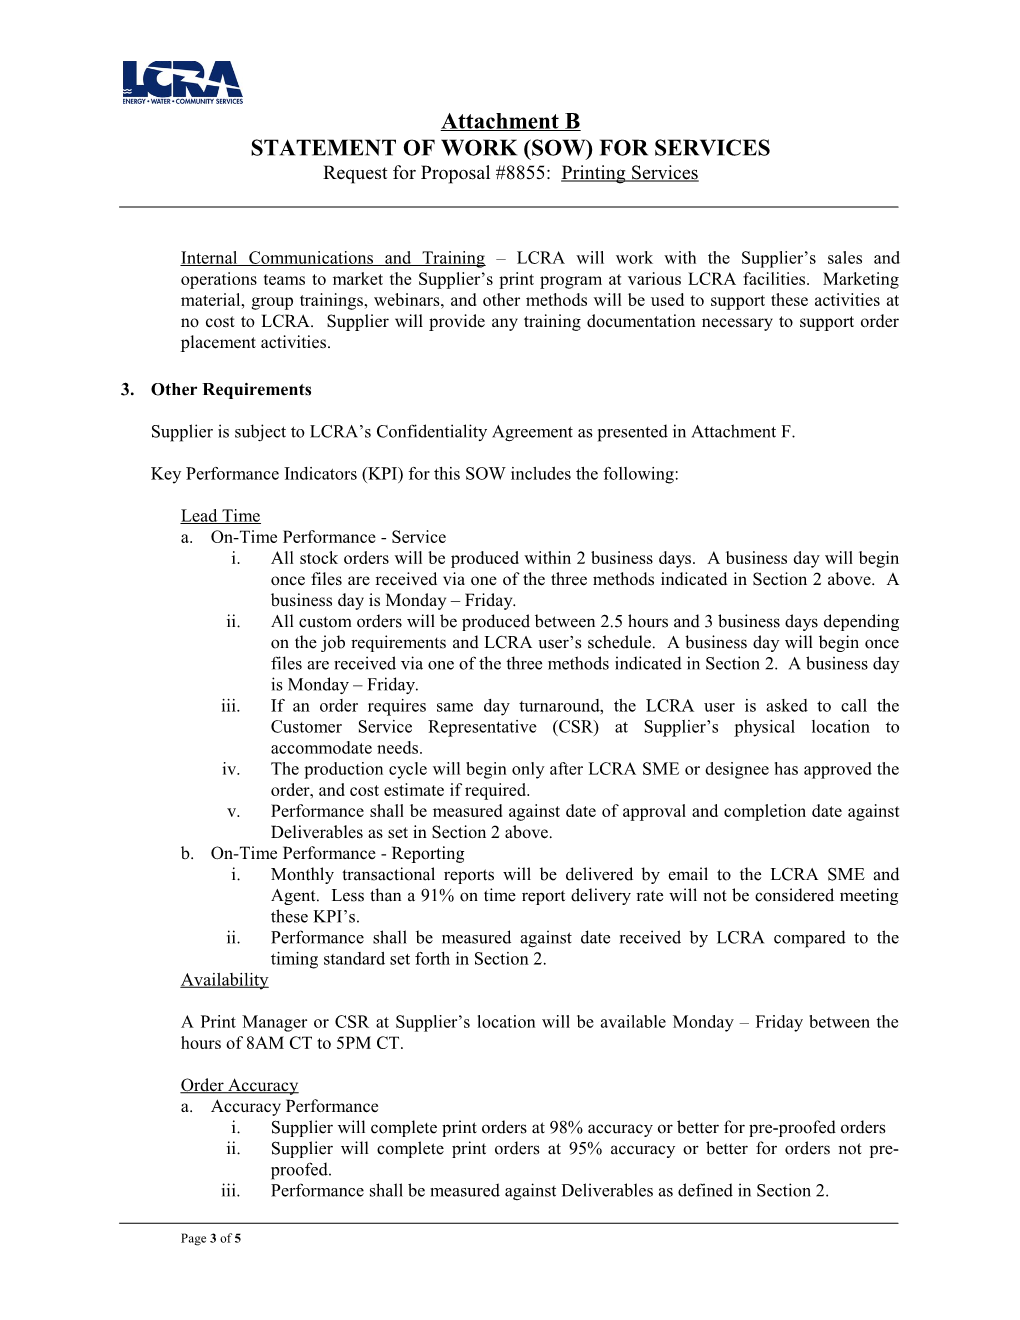 LCRA RFP8855 Printing Services Statement of Work Attachment B